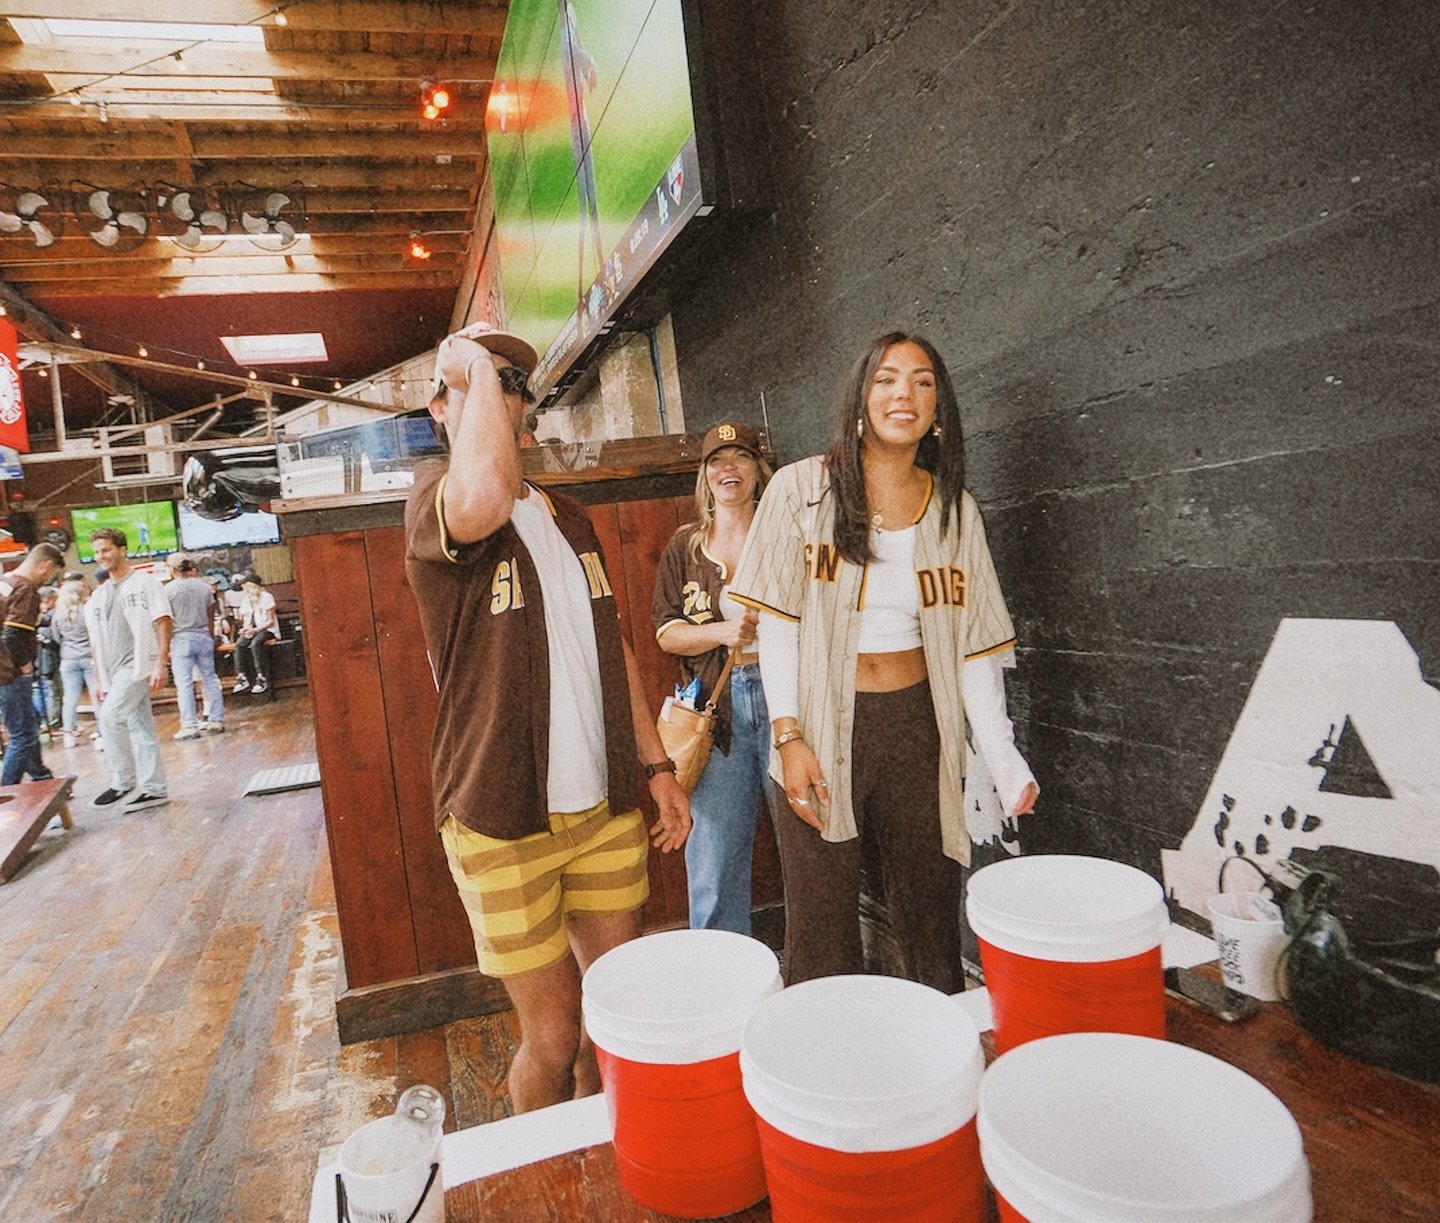 Get a round and play around before heading to Petco Park! 🍺🏓